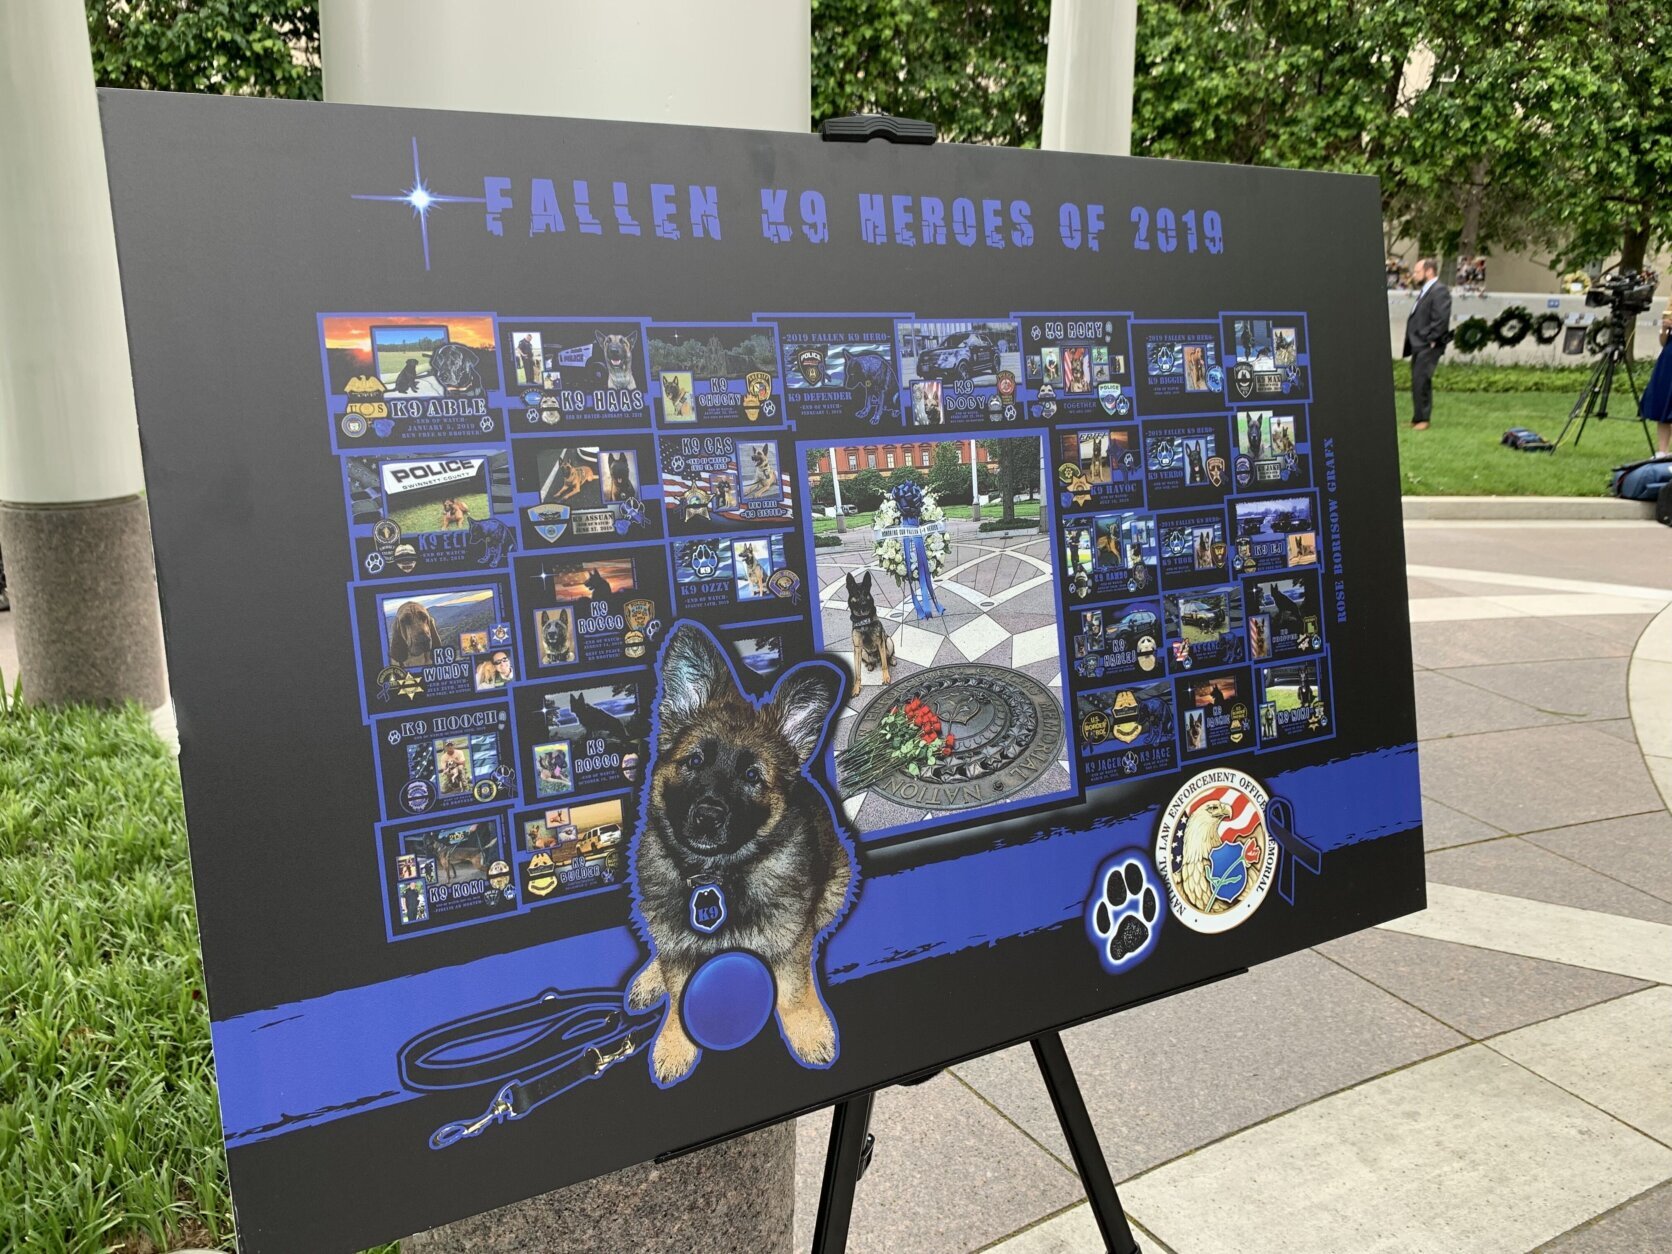 <p>The K-9 memorial ceremony started in 2018, continued in 2019, but the event in 2020 was canceled due to the national COVID-19 emergency.</p>
